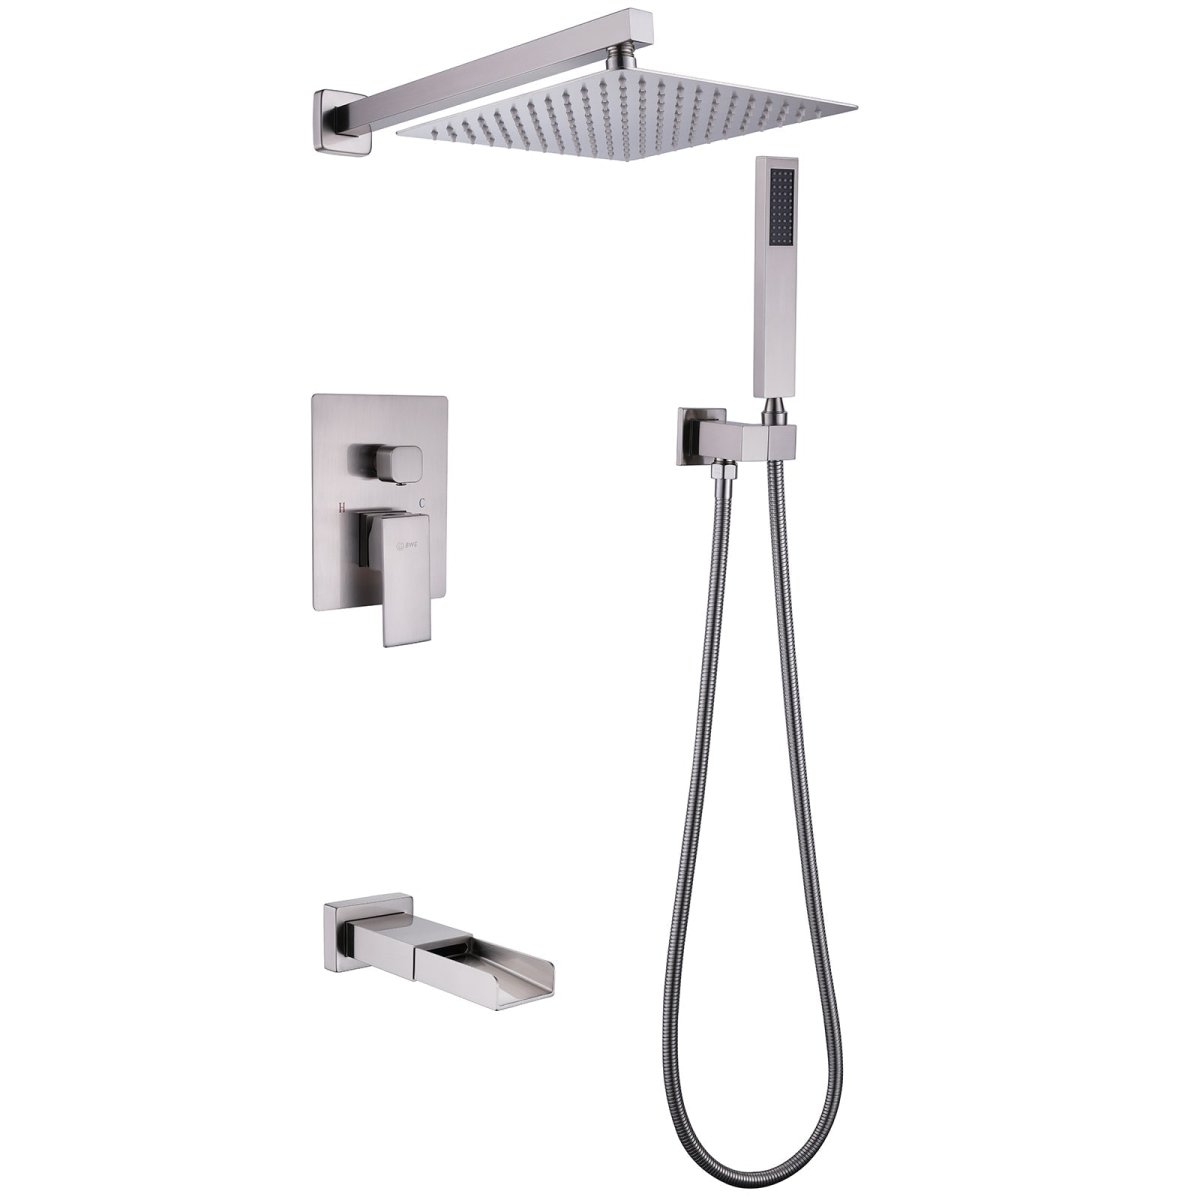 Waterfall Spout 3-Spray Tub and Shower Faucet Brushed Nickel - buyfaucet.com